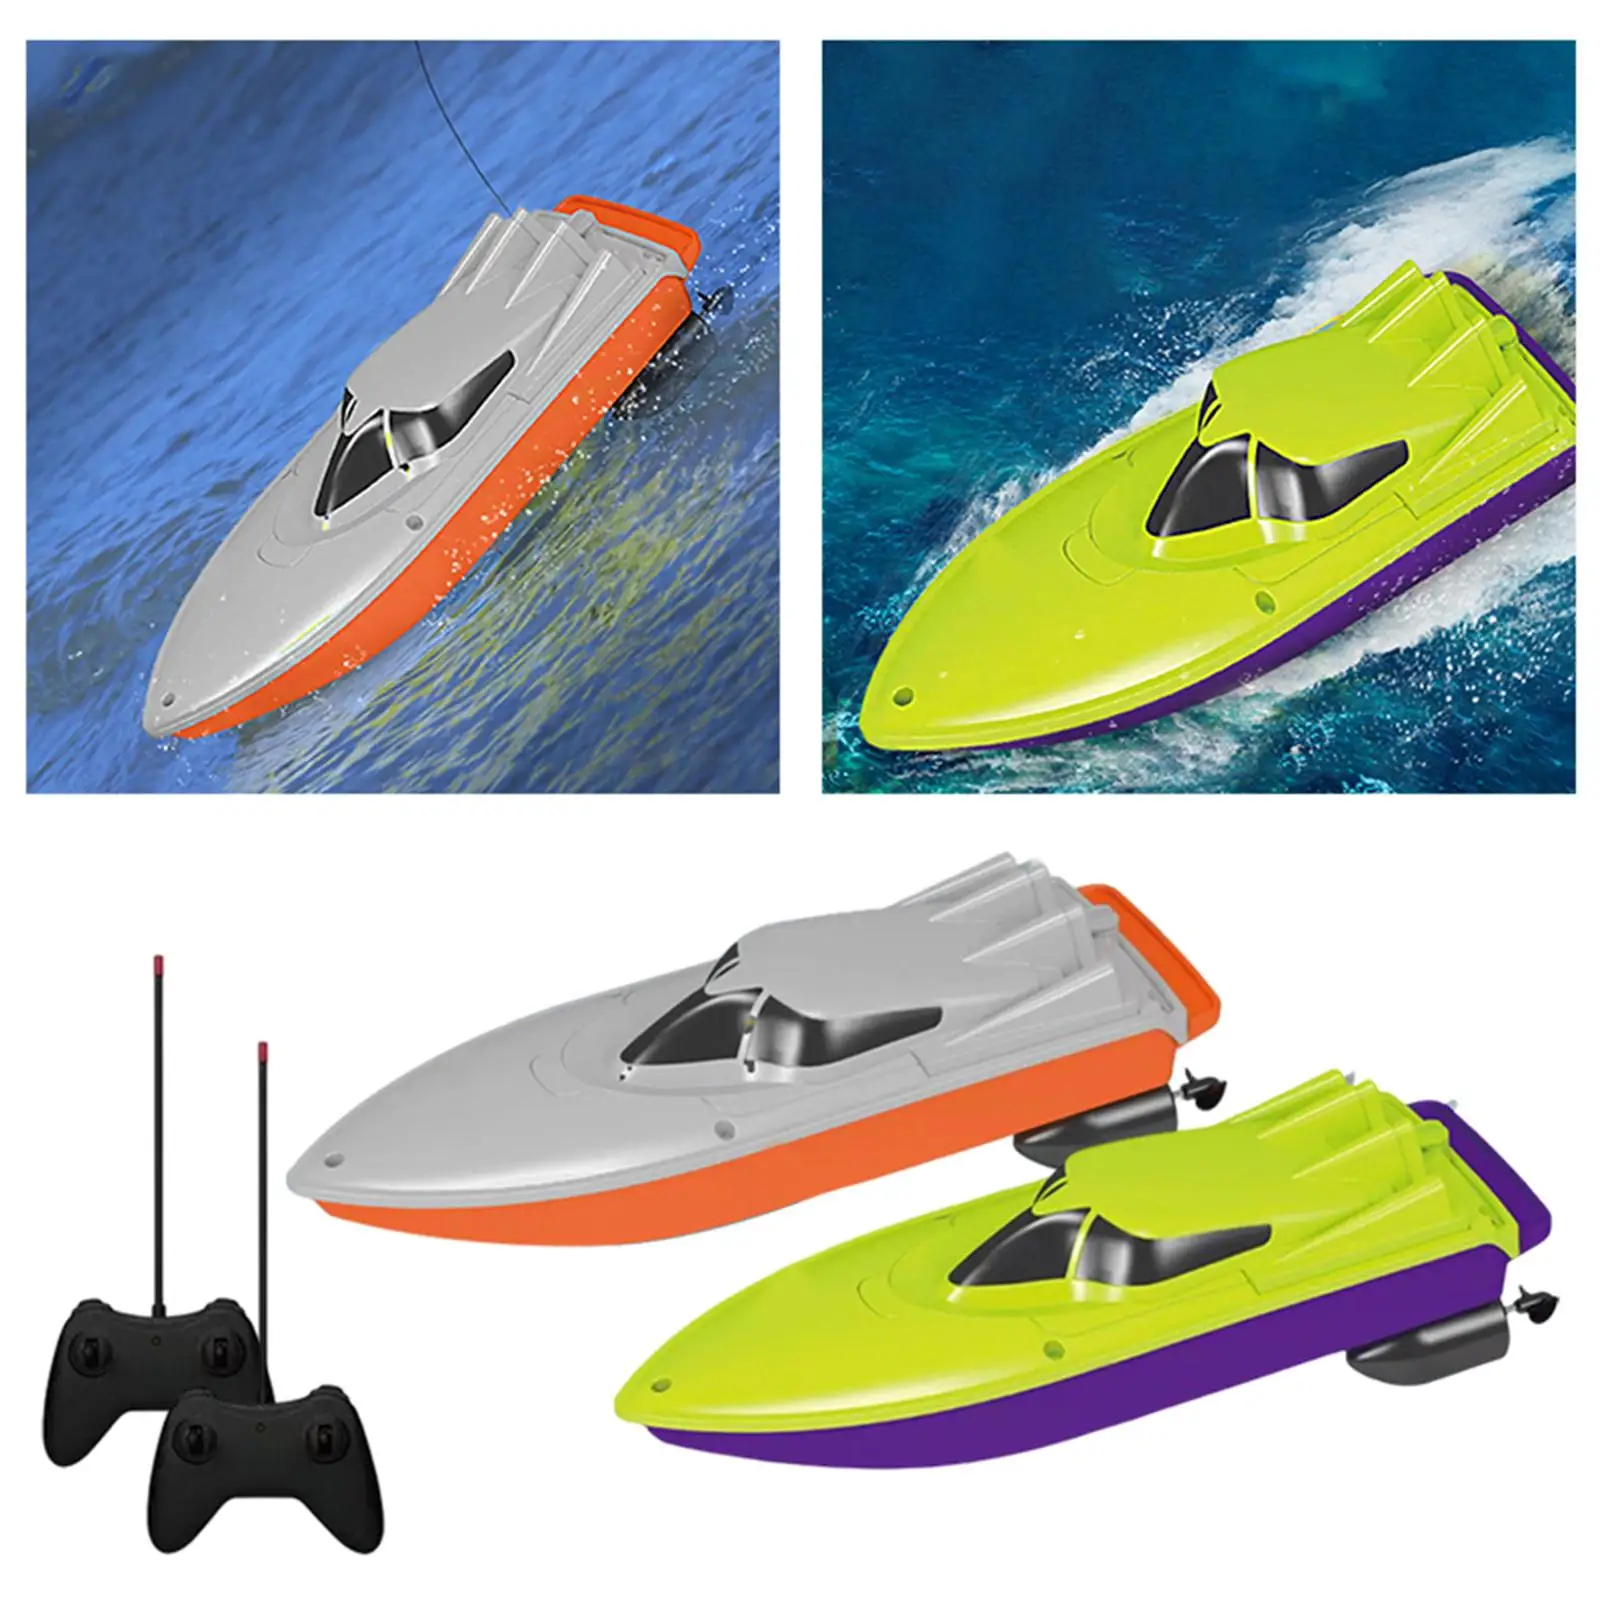 RC Boat 10+   Waterproof for Outdoor Sports Toy, Kids and Adults, River,